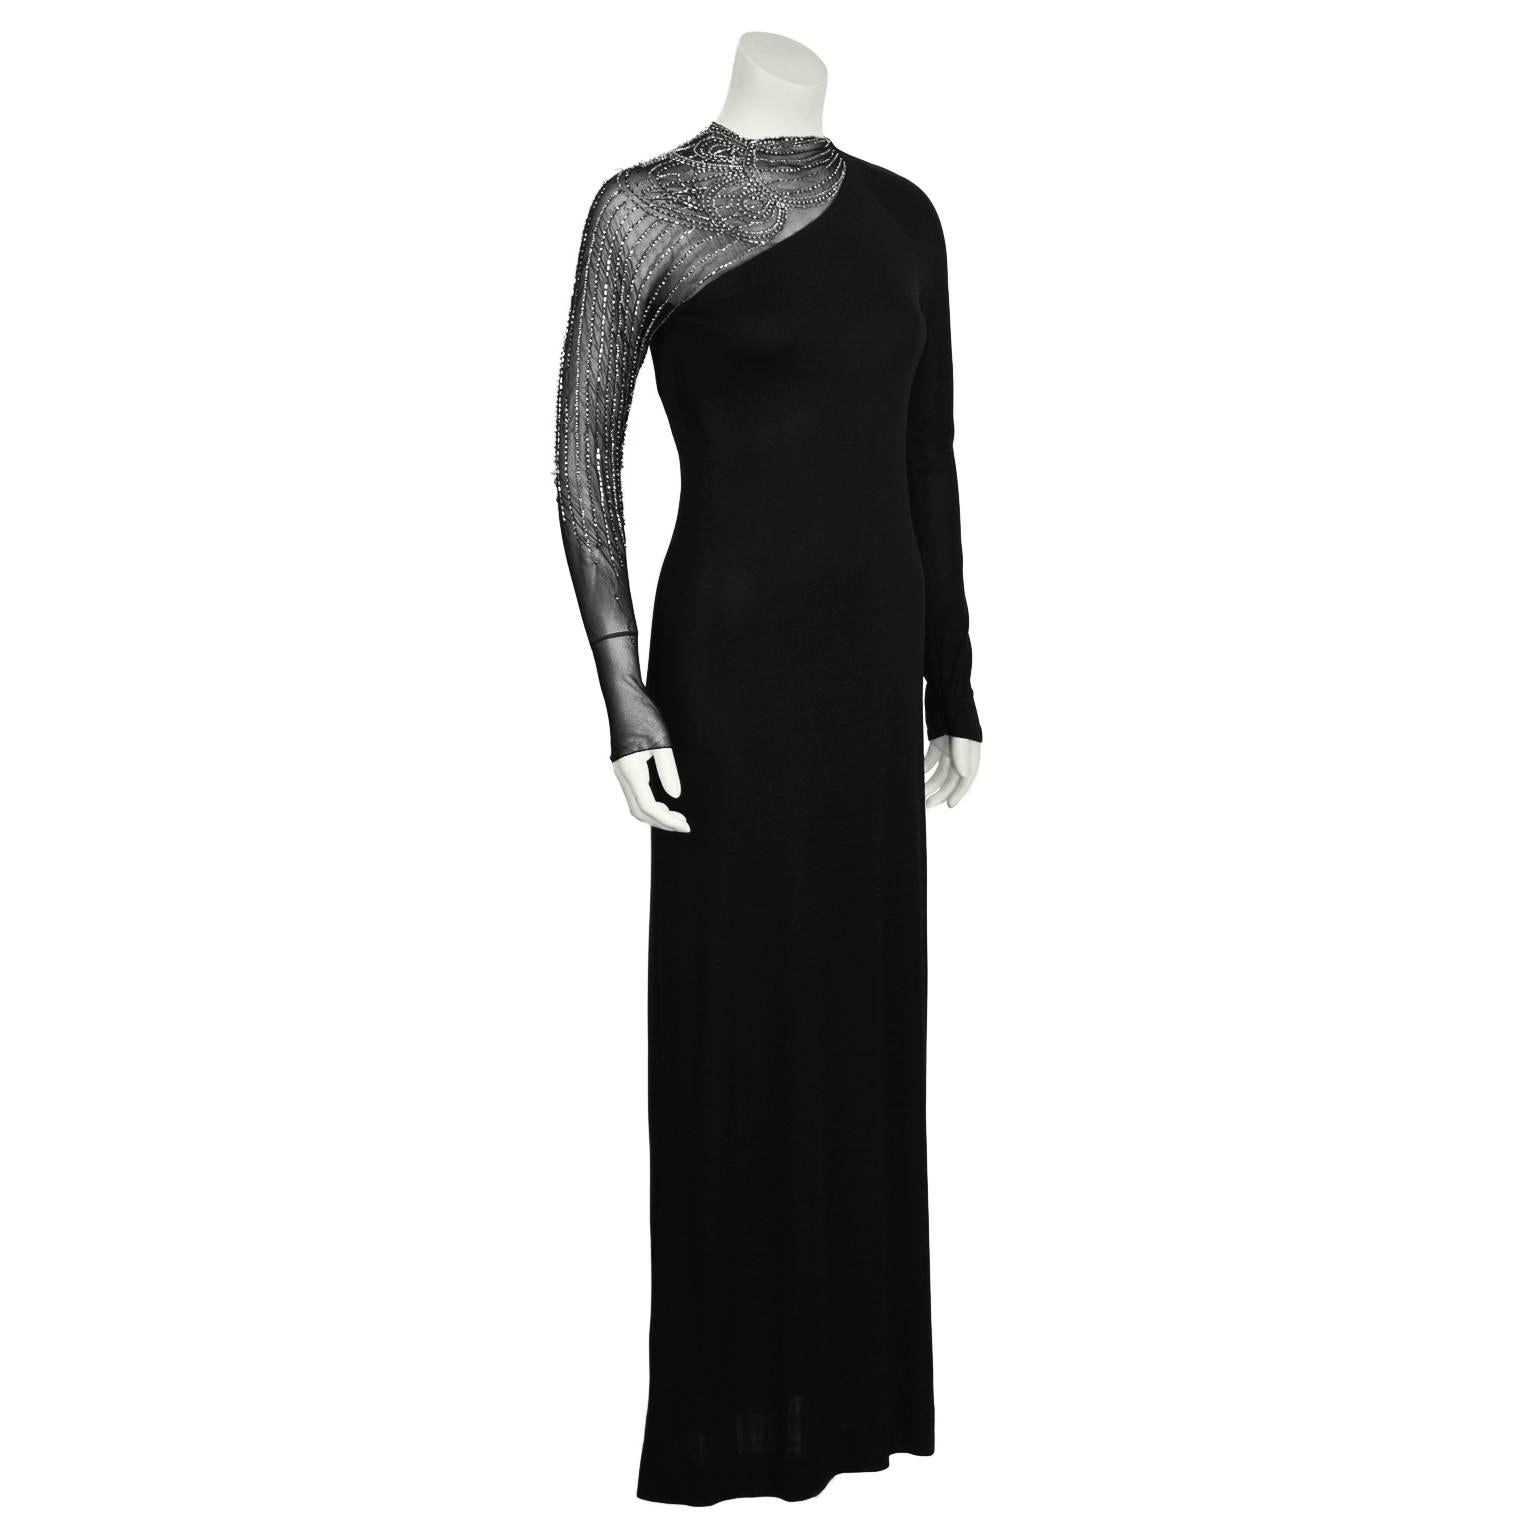 1950's Mollie Parnis black rayon and chiffon long sleeve gown with unique asymmetrical shear chiffon and beading shoulder. The intricate beaded pattern, made up of rhinestones and bugles, cascades down the arm. Zipper and hook in the back. Small